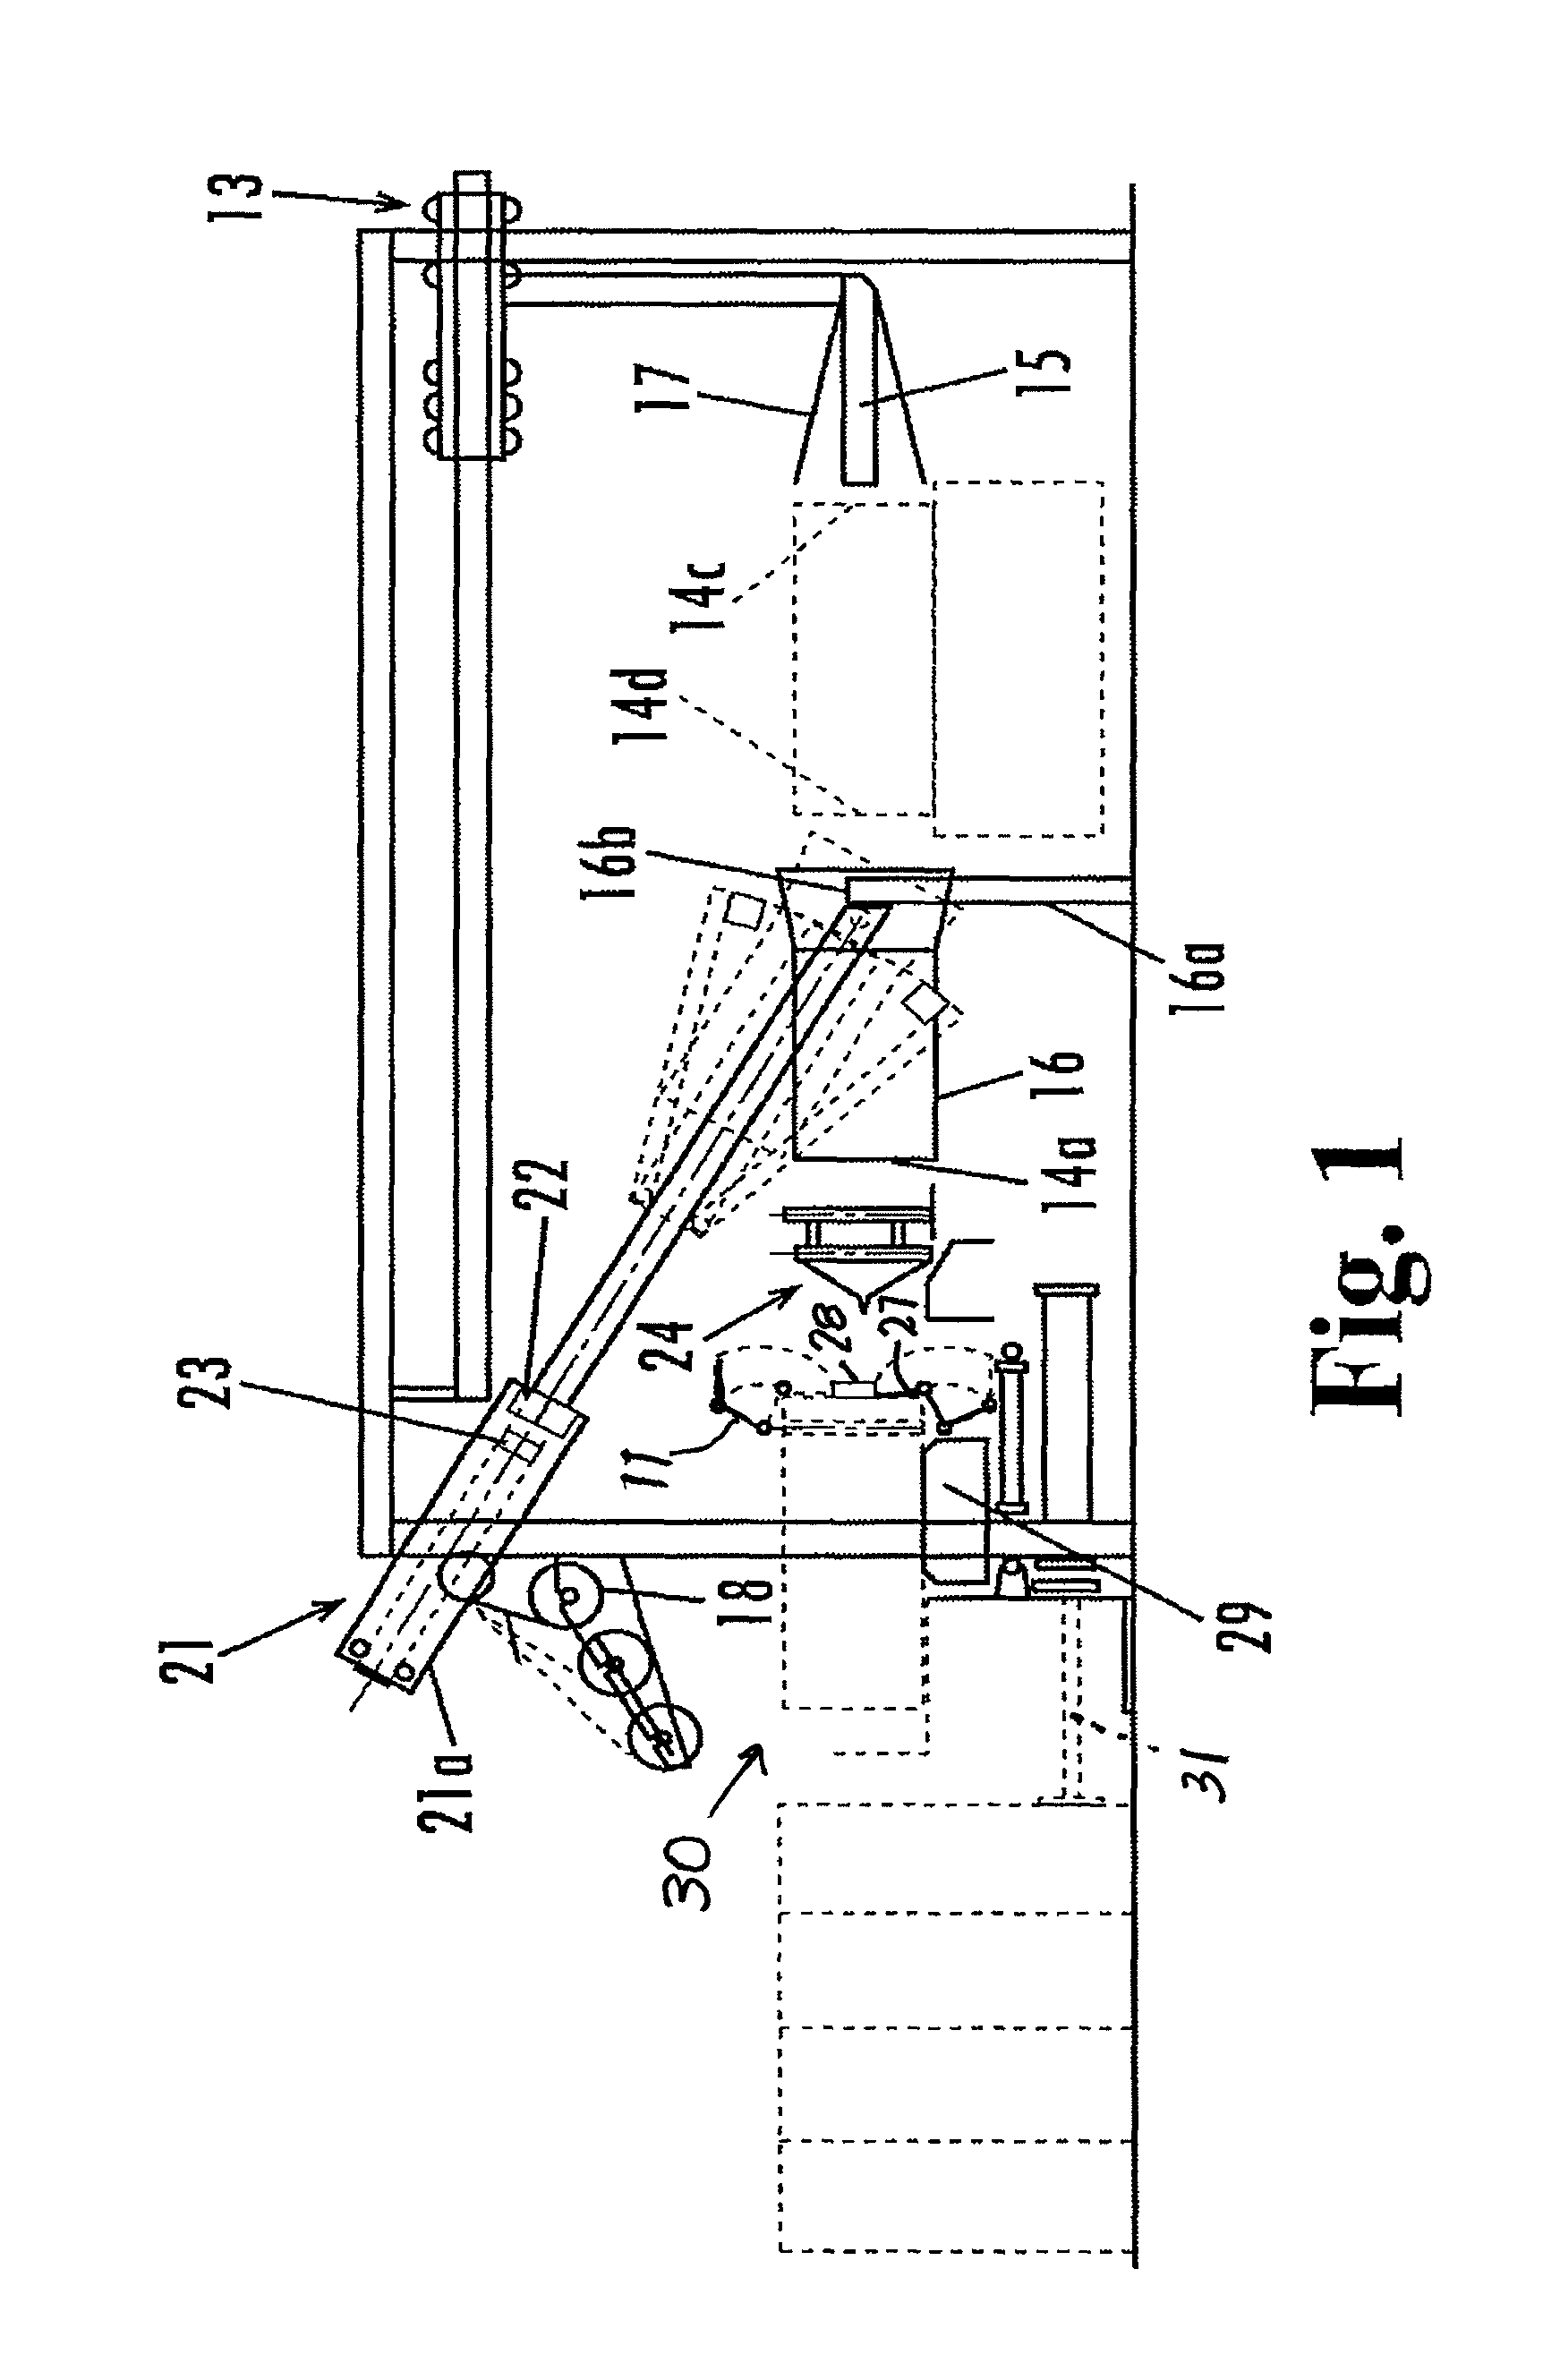 Automatic bale wrapping apparatus